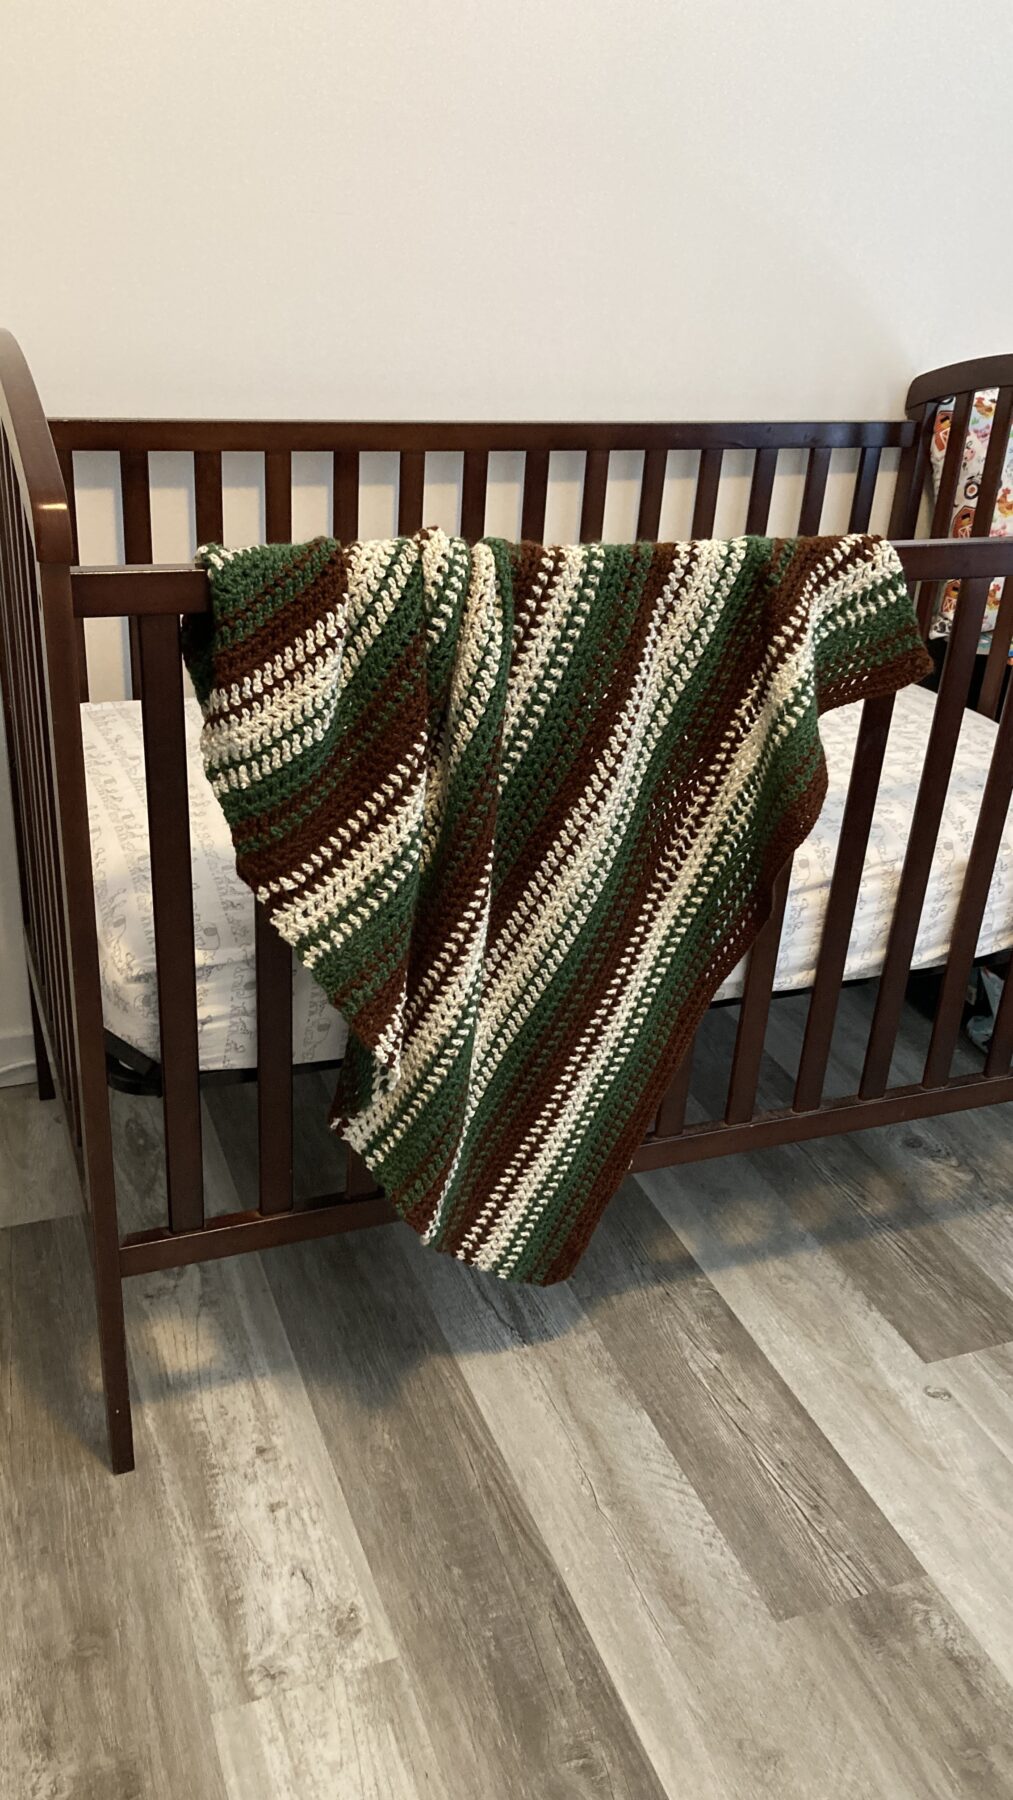 Using as a baby blanket